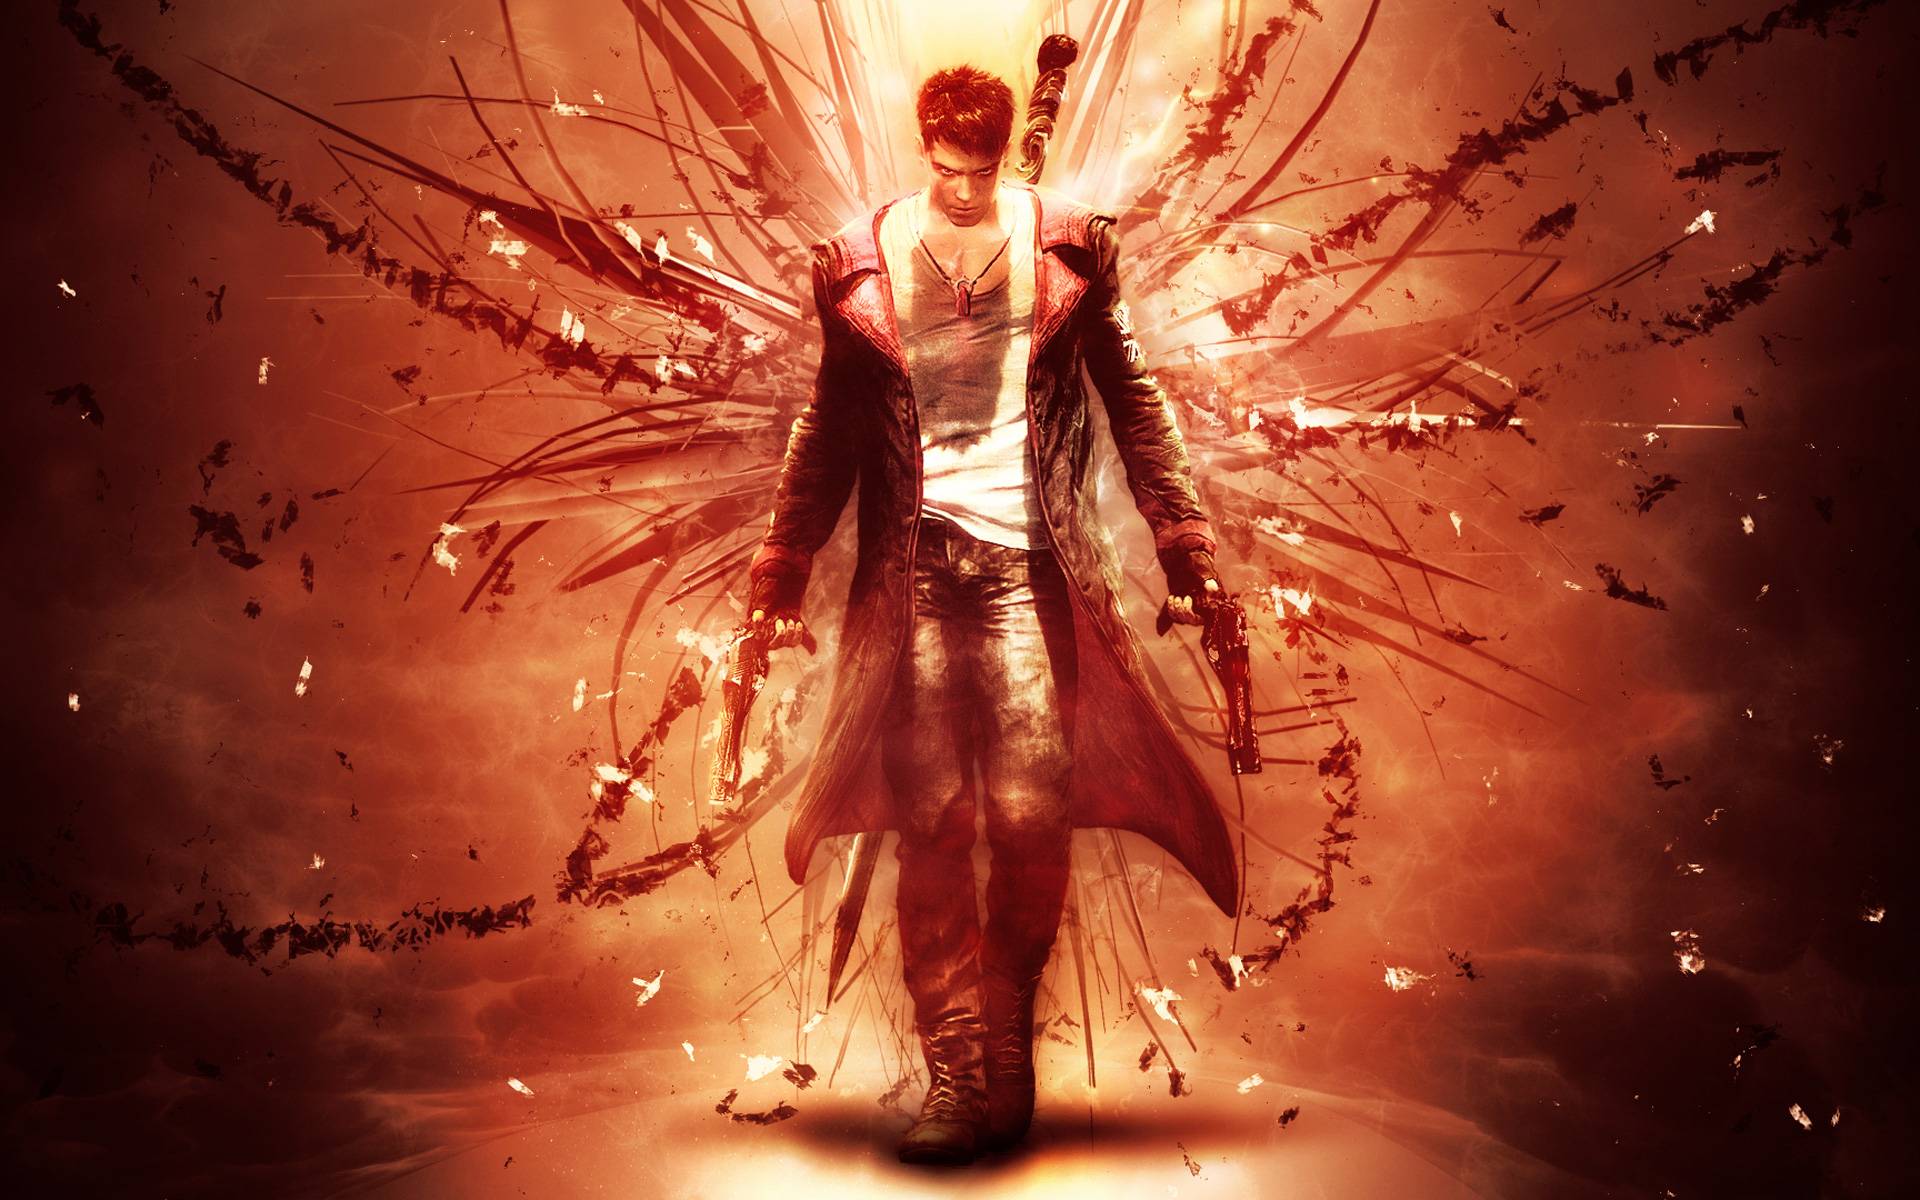 free-download-dmc-devil-may-cry-is-due-for-the-ps3-xbox-and-pc-it-is-published-1920x1200-for